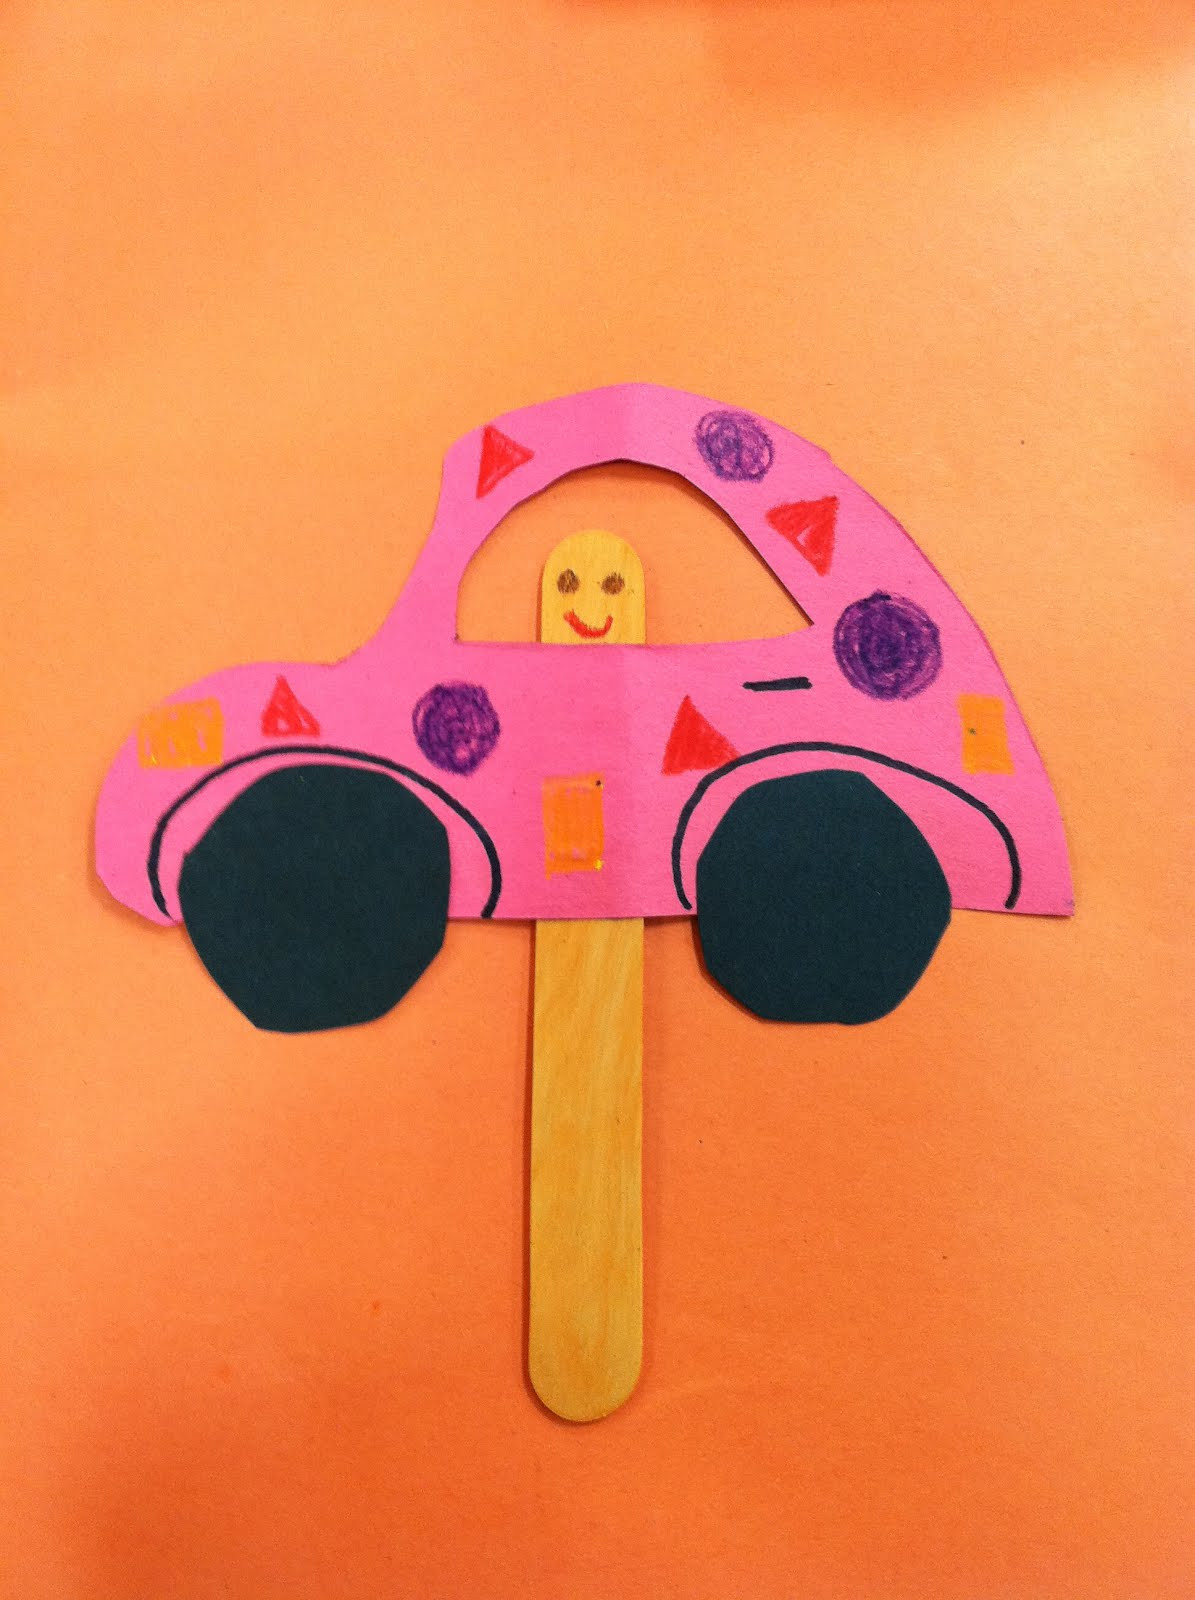 Arts And Crafts For Preschoolers
 In the Children s Room Theme Thursday Cars Cars Cars